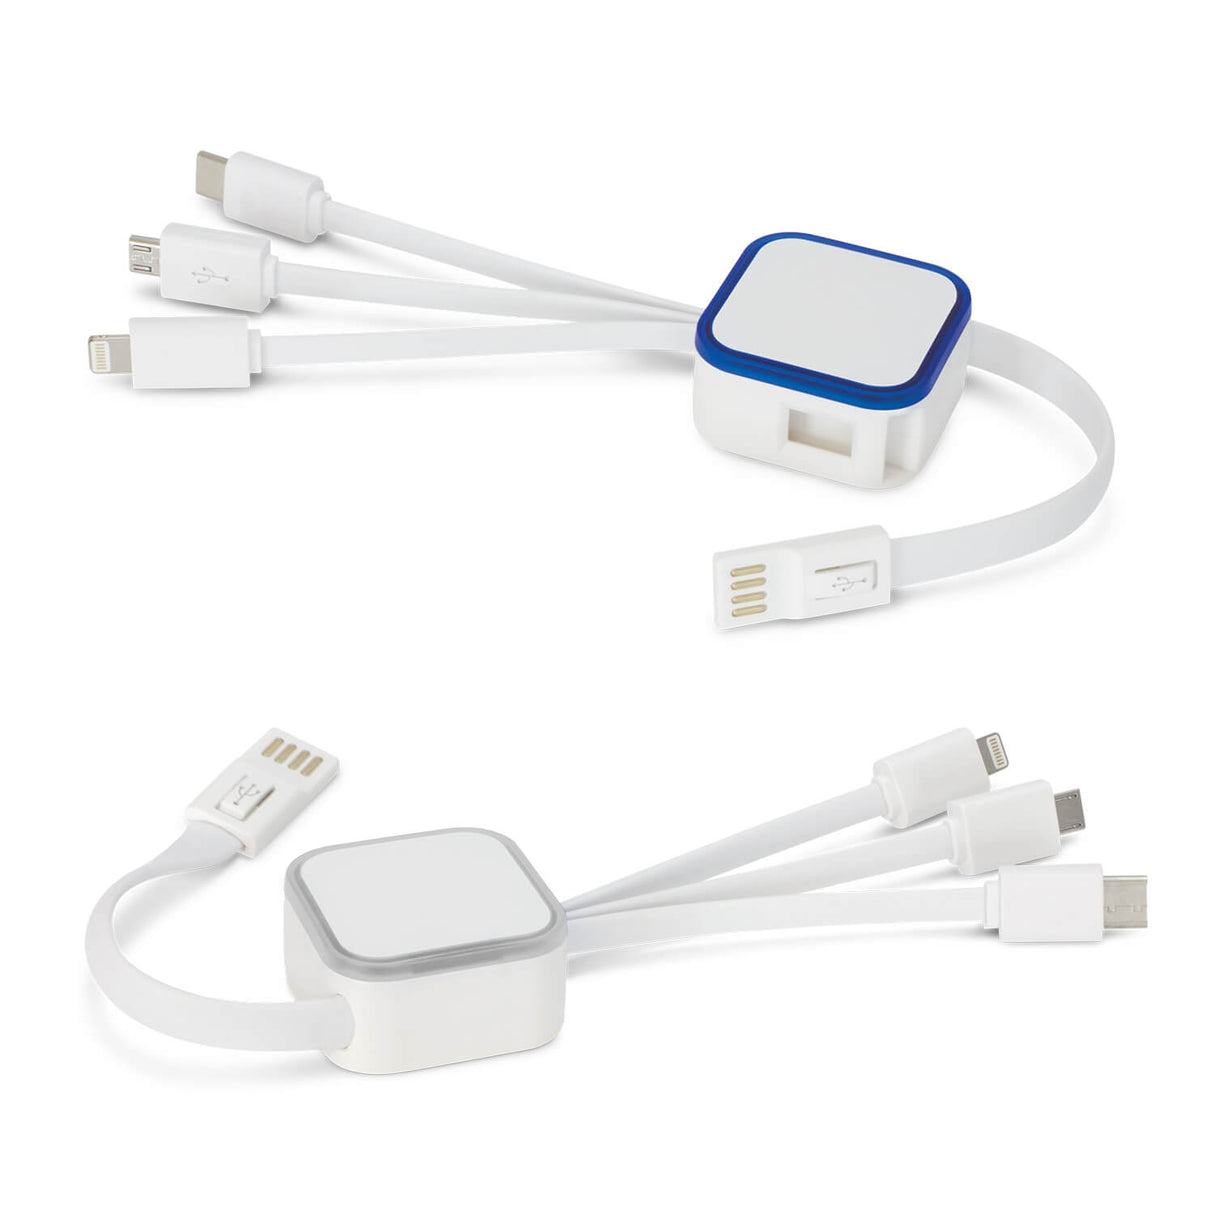 Cypher Charging Cable - Printed